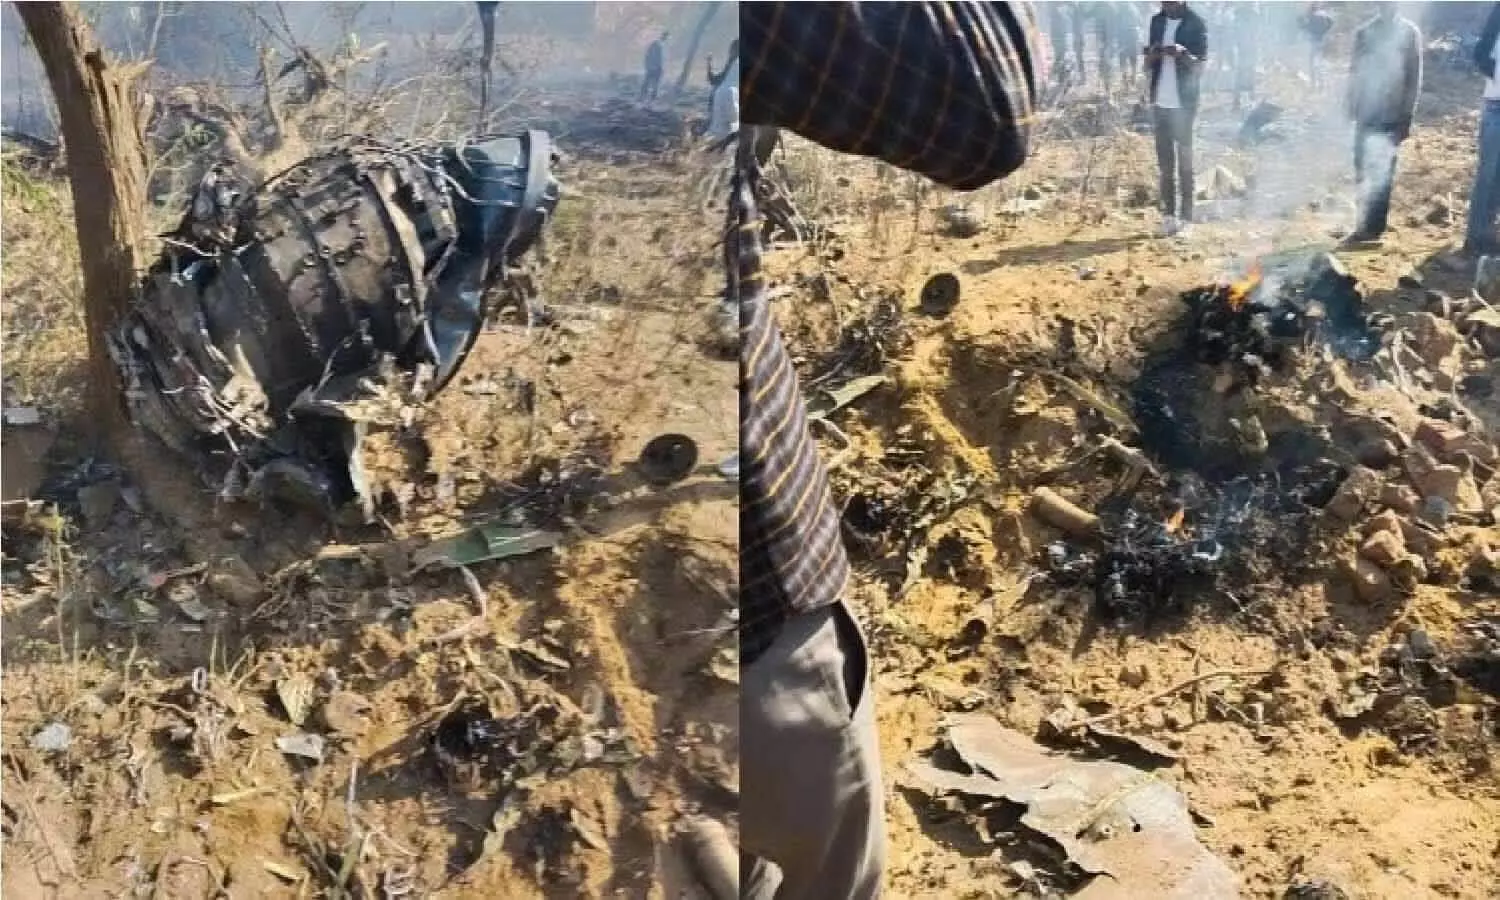 Helicopter Crash in Rajasthan